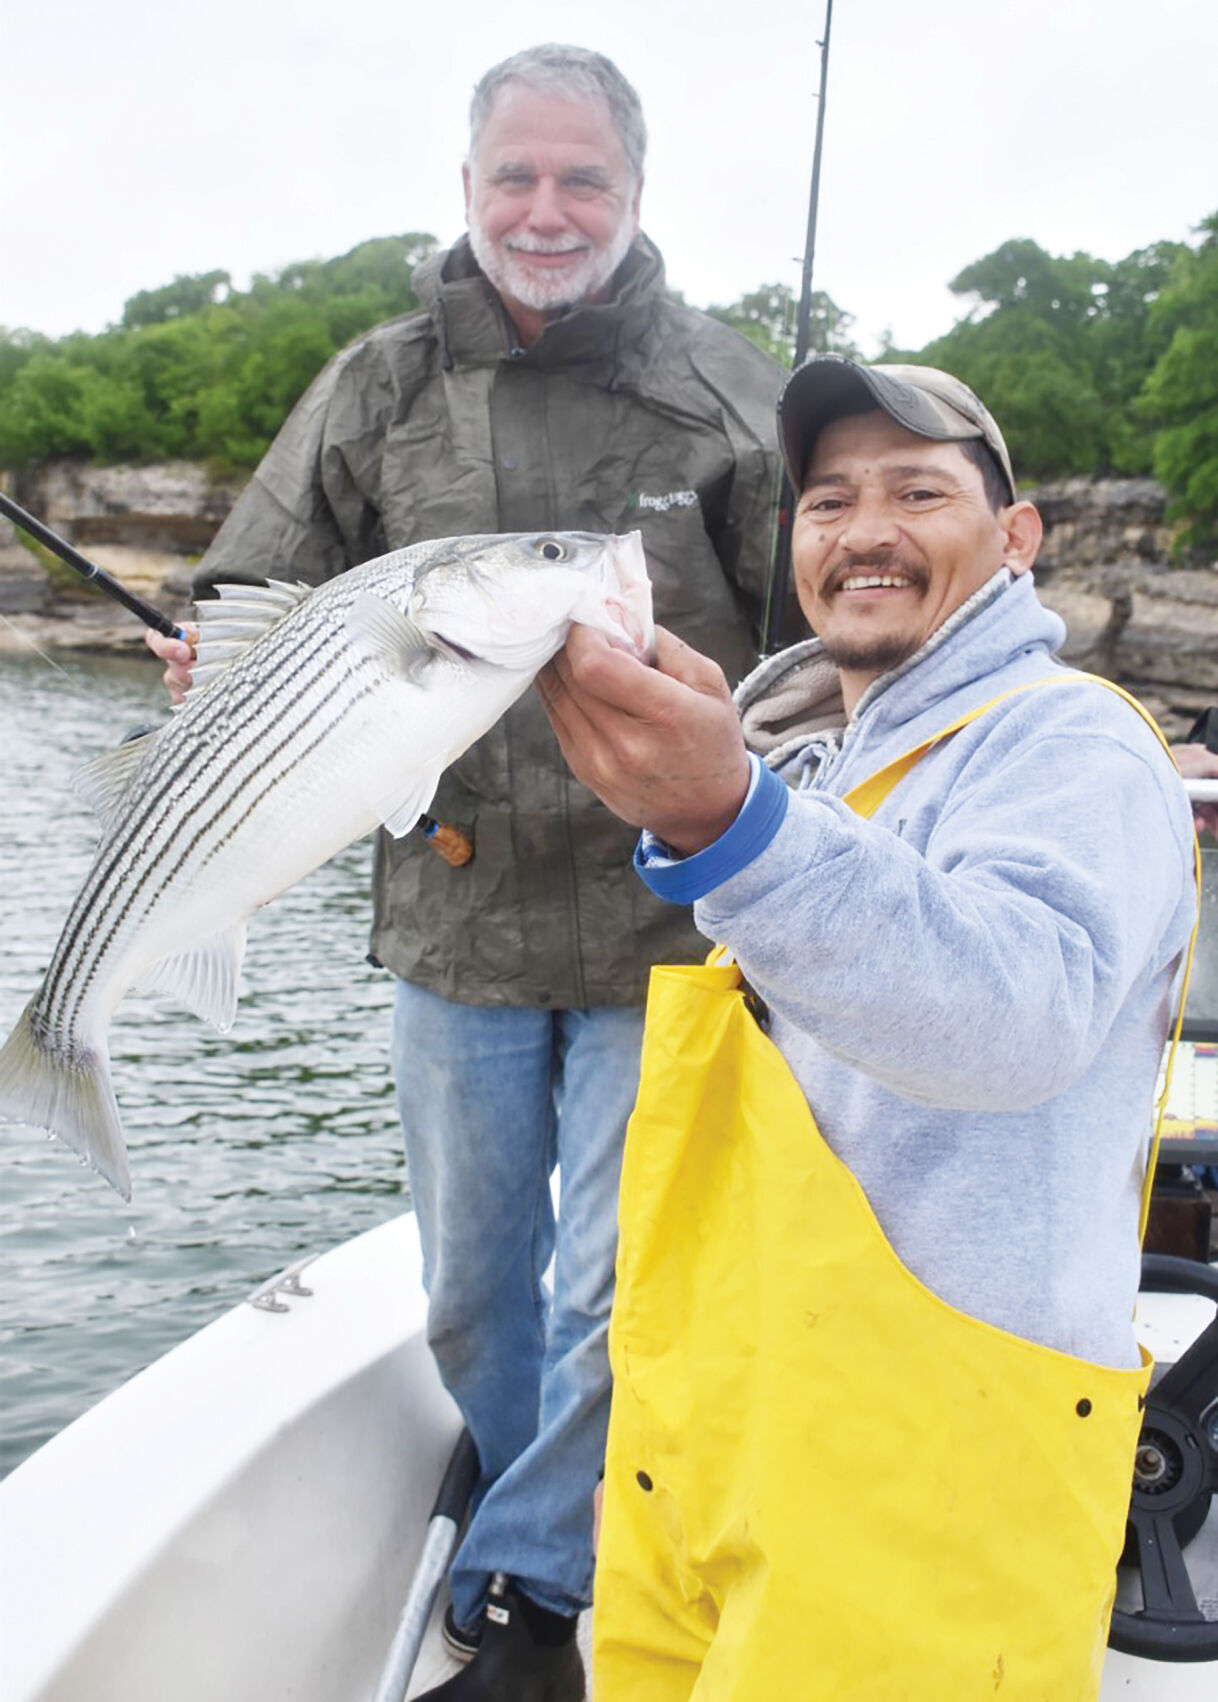 Luke fishes Lake Texoma with topwater lures Sports heraldbanner